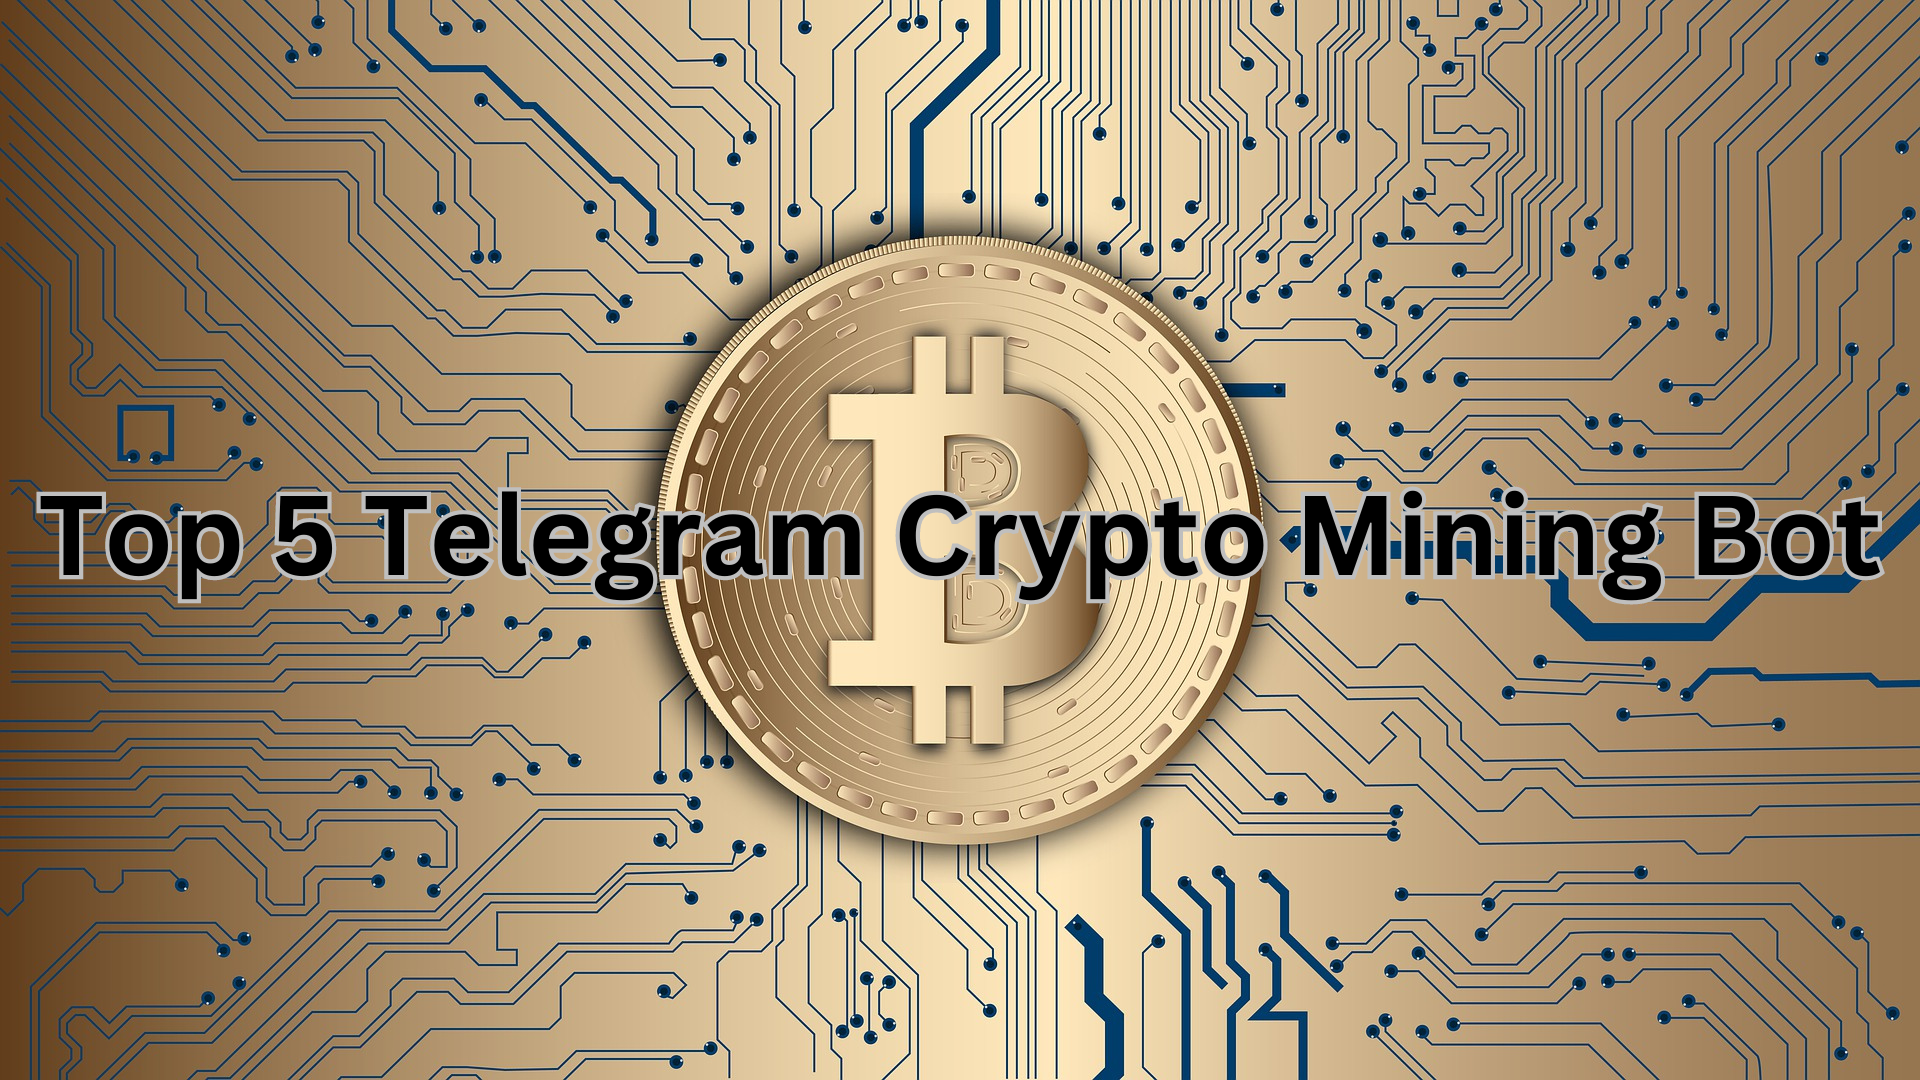 Top 5 Telegram Crypto Mining Bots to Maximize Your Earnings